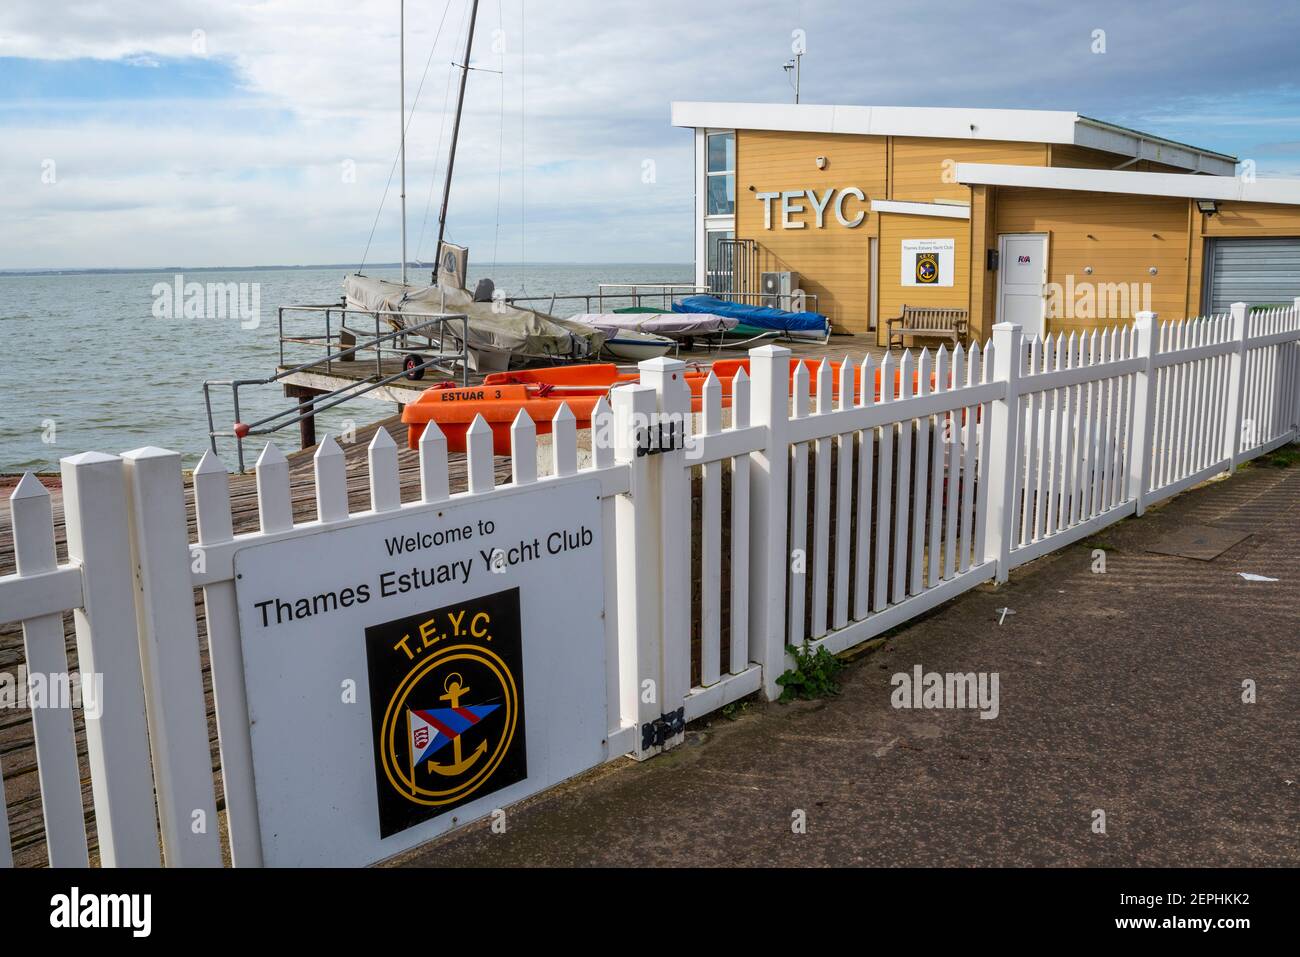 Thames Estuary Yacht Club vessel storage and clubhouse on the seafront on Western Esplanade, Southend on Sea, Essex, UK Stock Photo